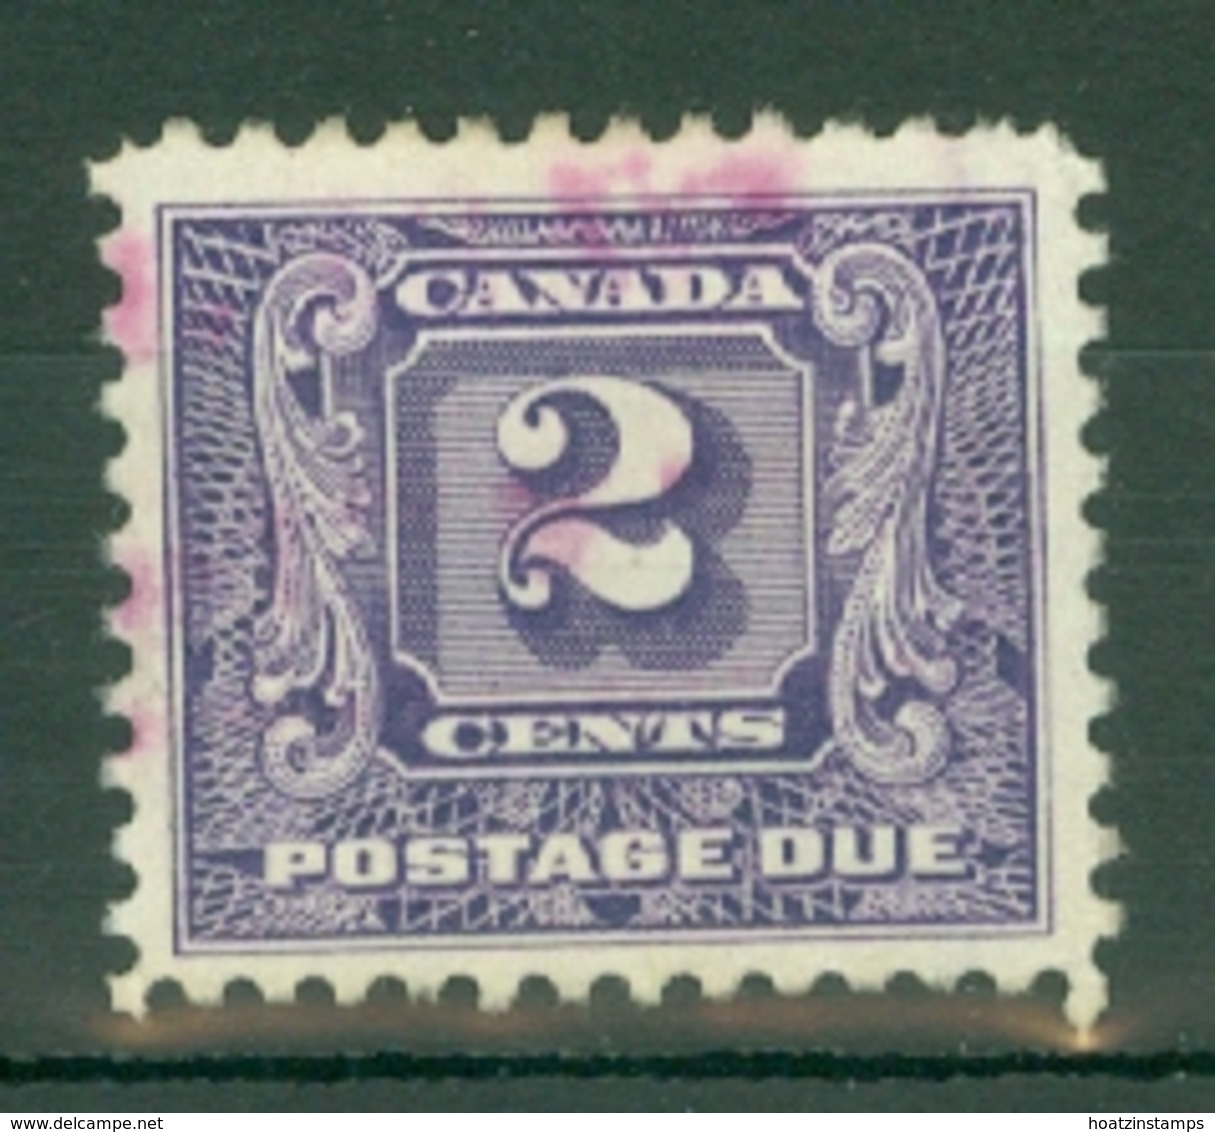 Canada: 1930/32   Postage Due    SG D10    2c       Used - Postage Due